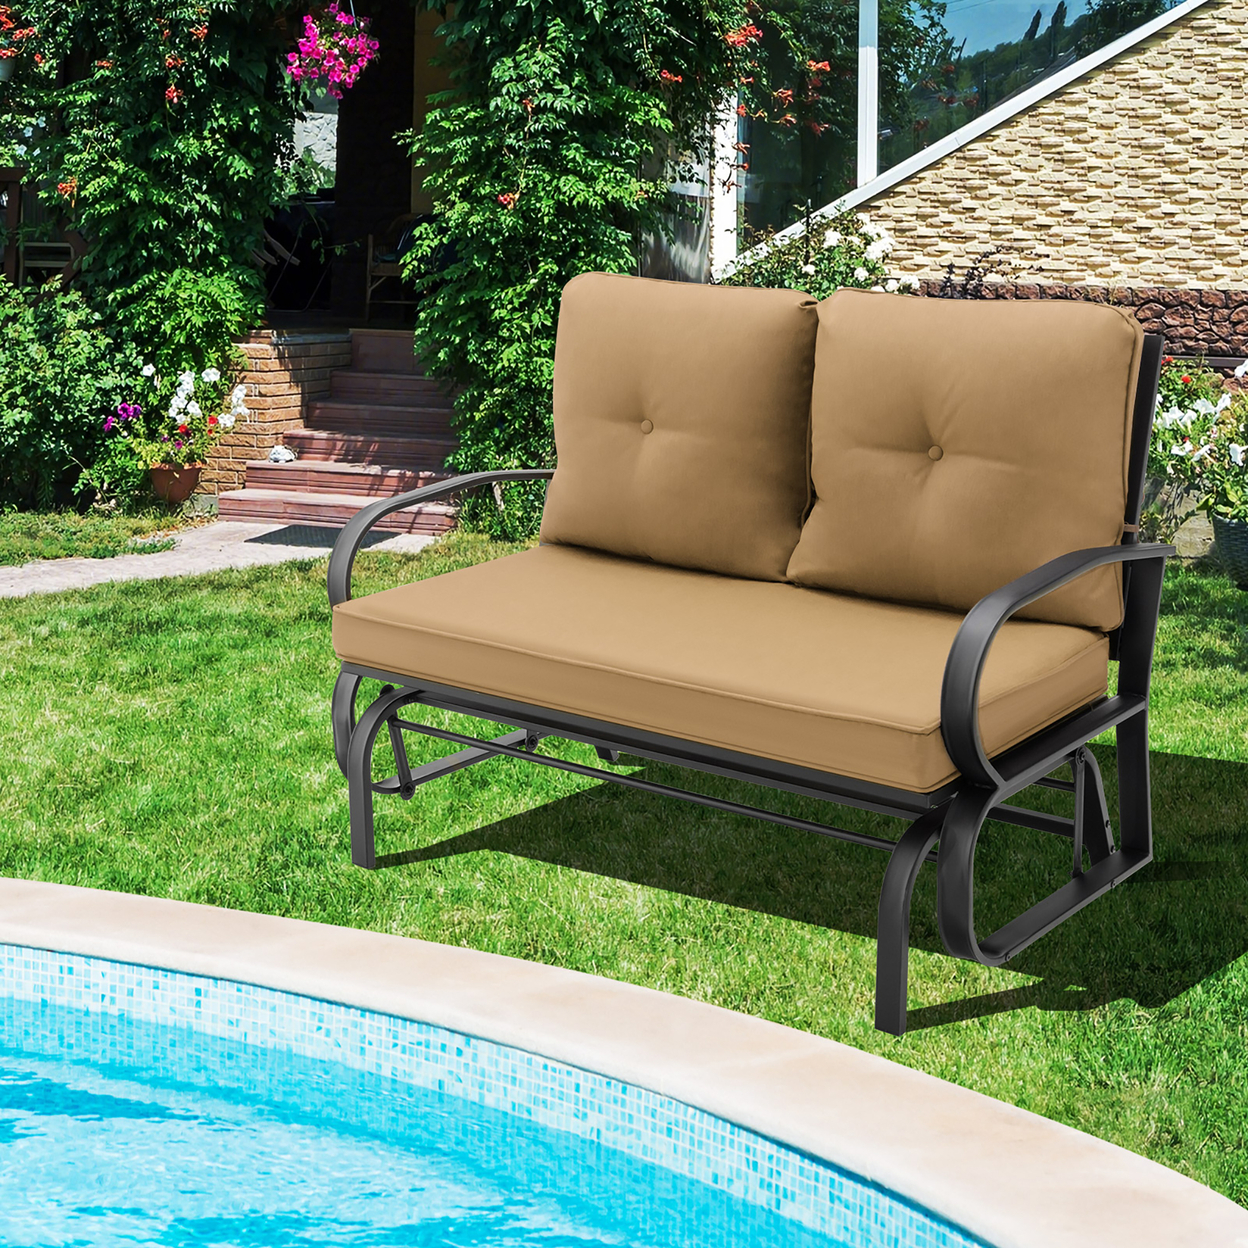 2-Person Outdoor Patio Glider Bench Swing Seat Bench W/ Seat & Back Cushions - Beige